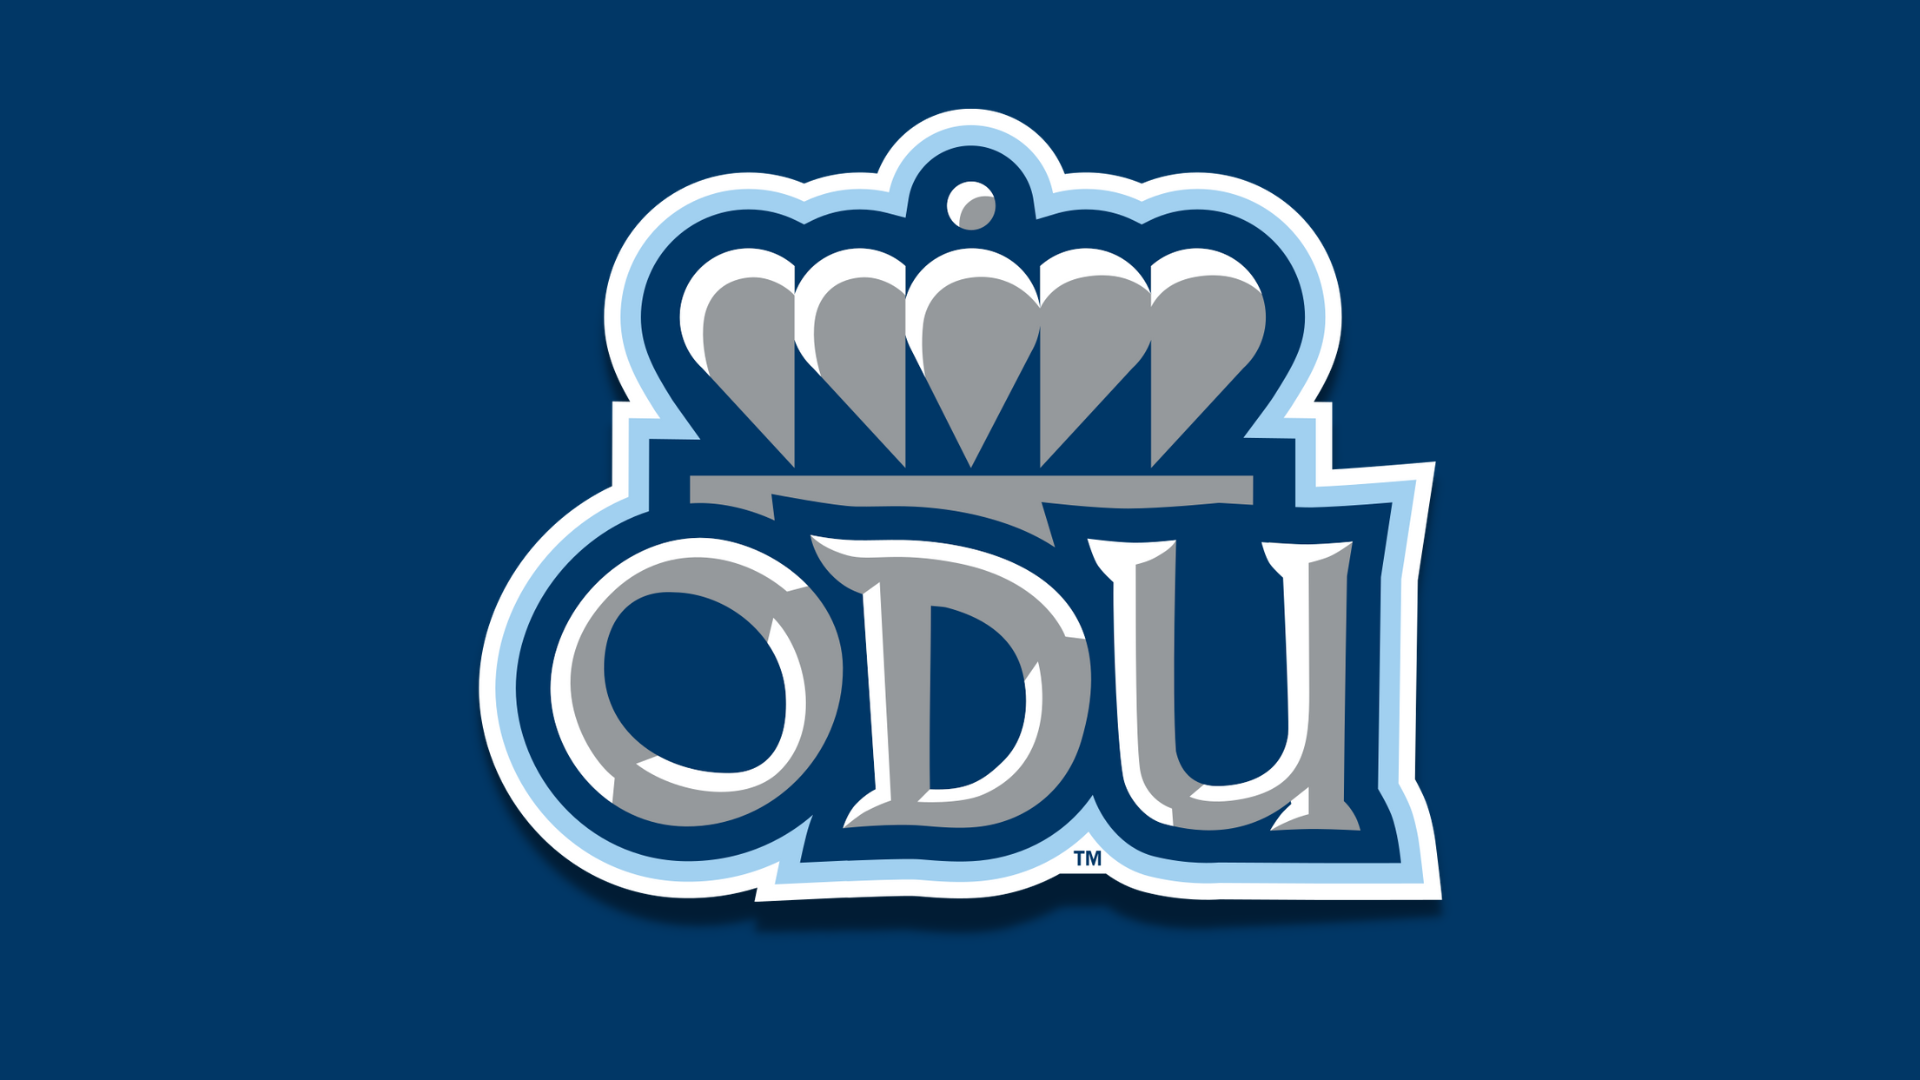 Ryan Nadeau Joins Old Dominion as Assistant Basketball Coach After Success at Virginia Tech & Chicago Bulls